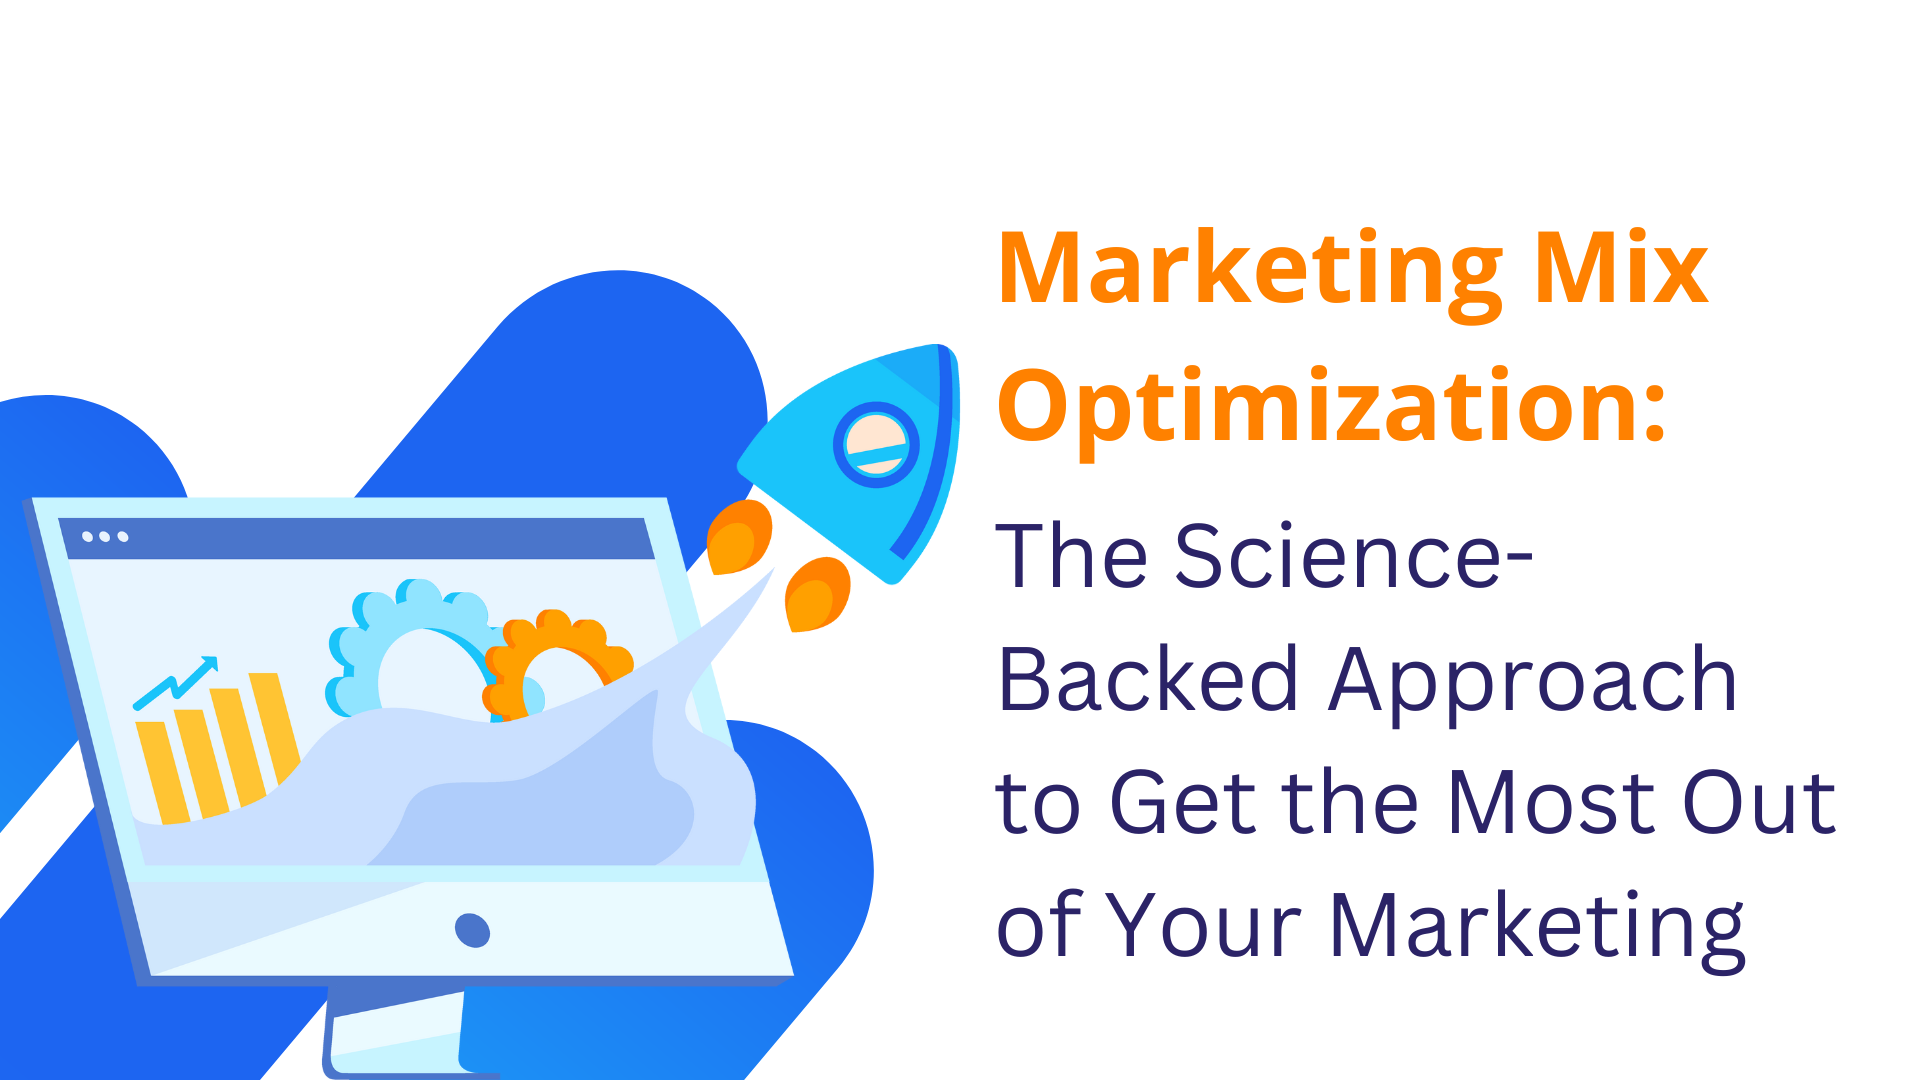 Marketing Mix Optimization: The Science-Backed Approach to Get the Most Out of Your Marketing